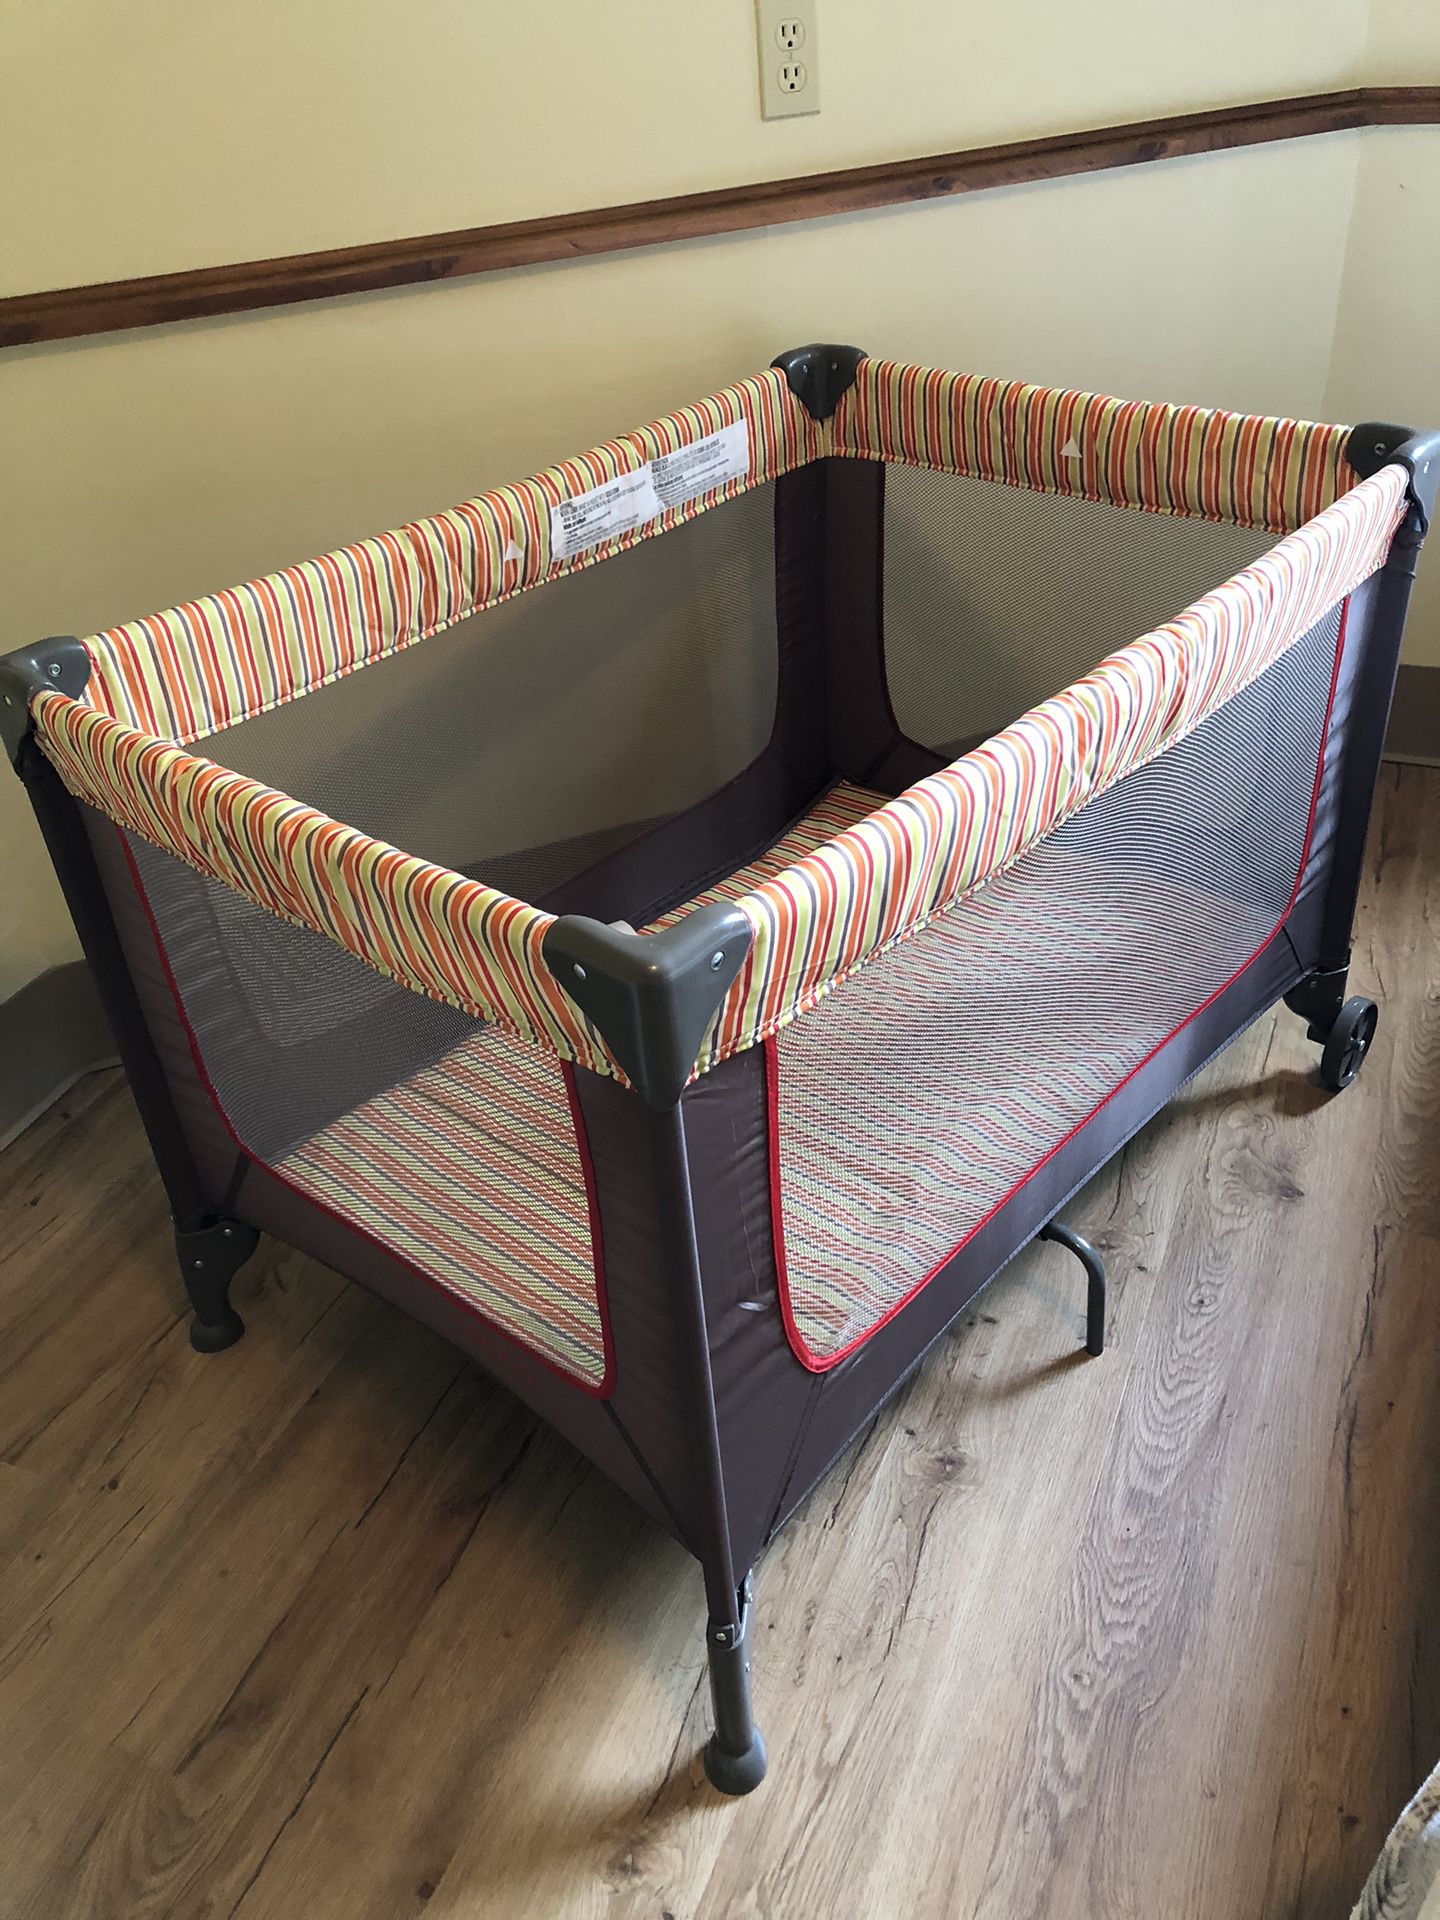 Portable Baby Playpen - never used. 